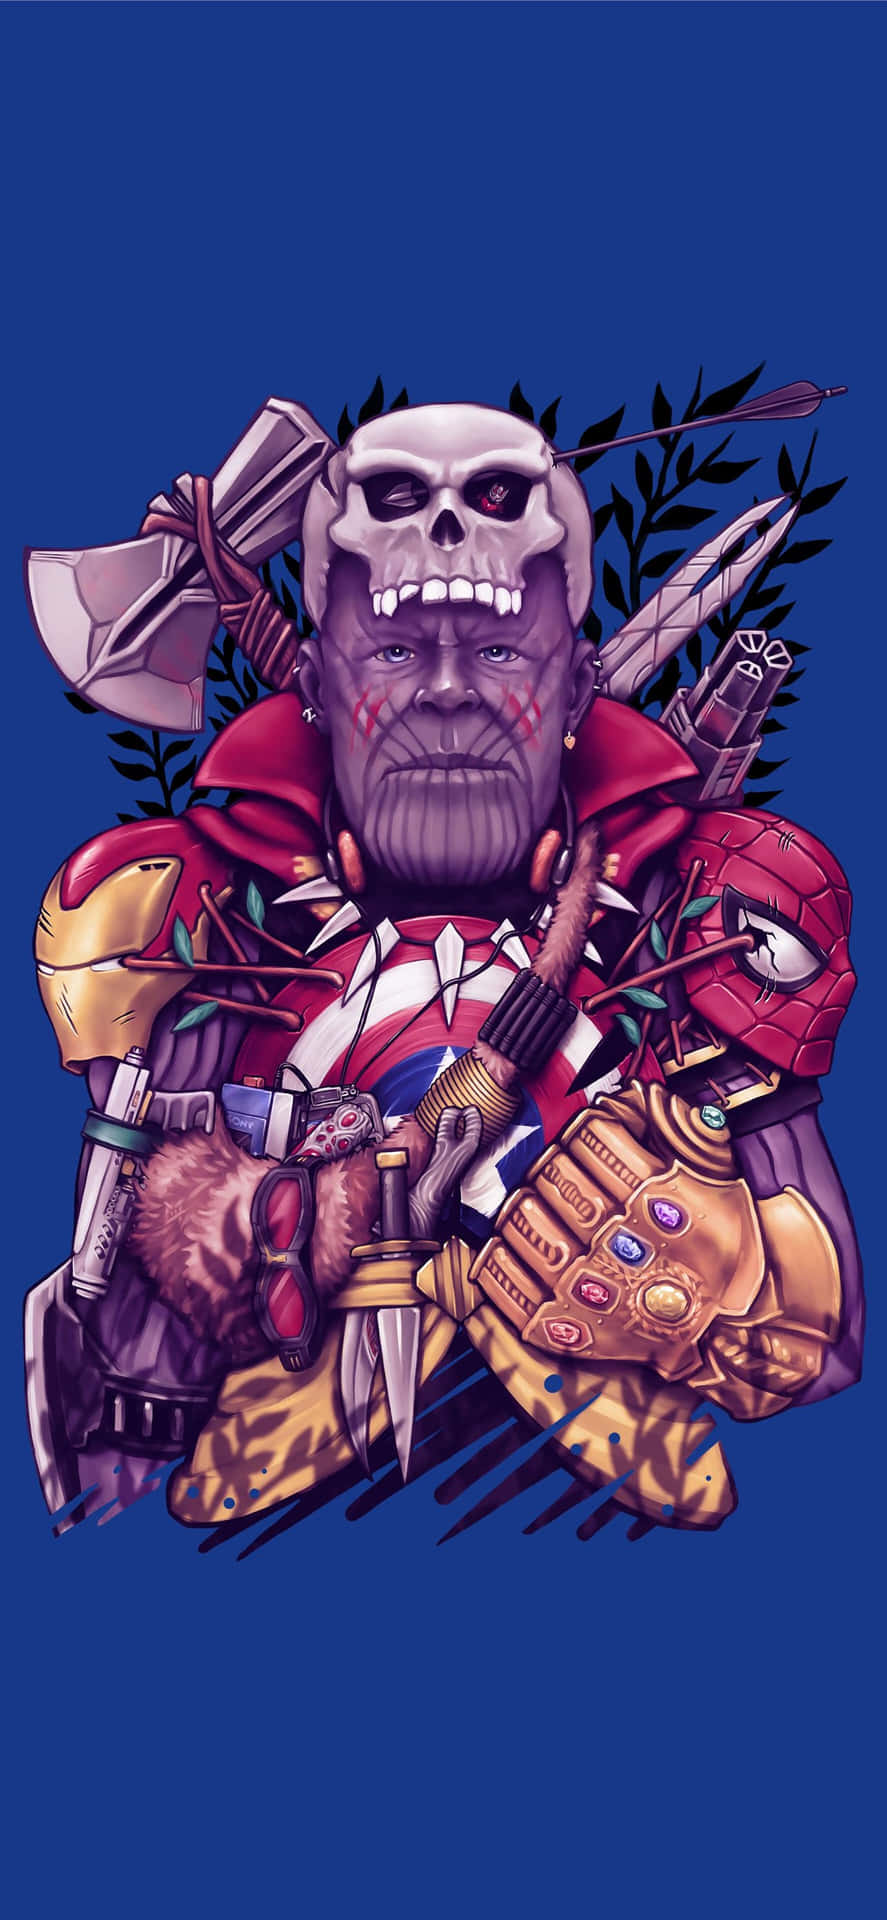 Be the Hero and own the powerful Marvel Avengers Endgame iPhone Wallpaper